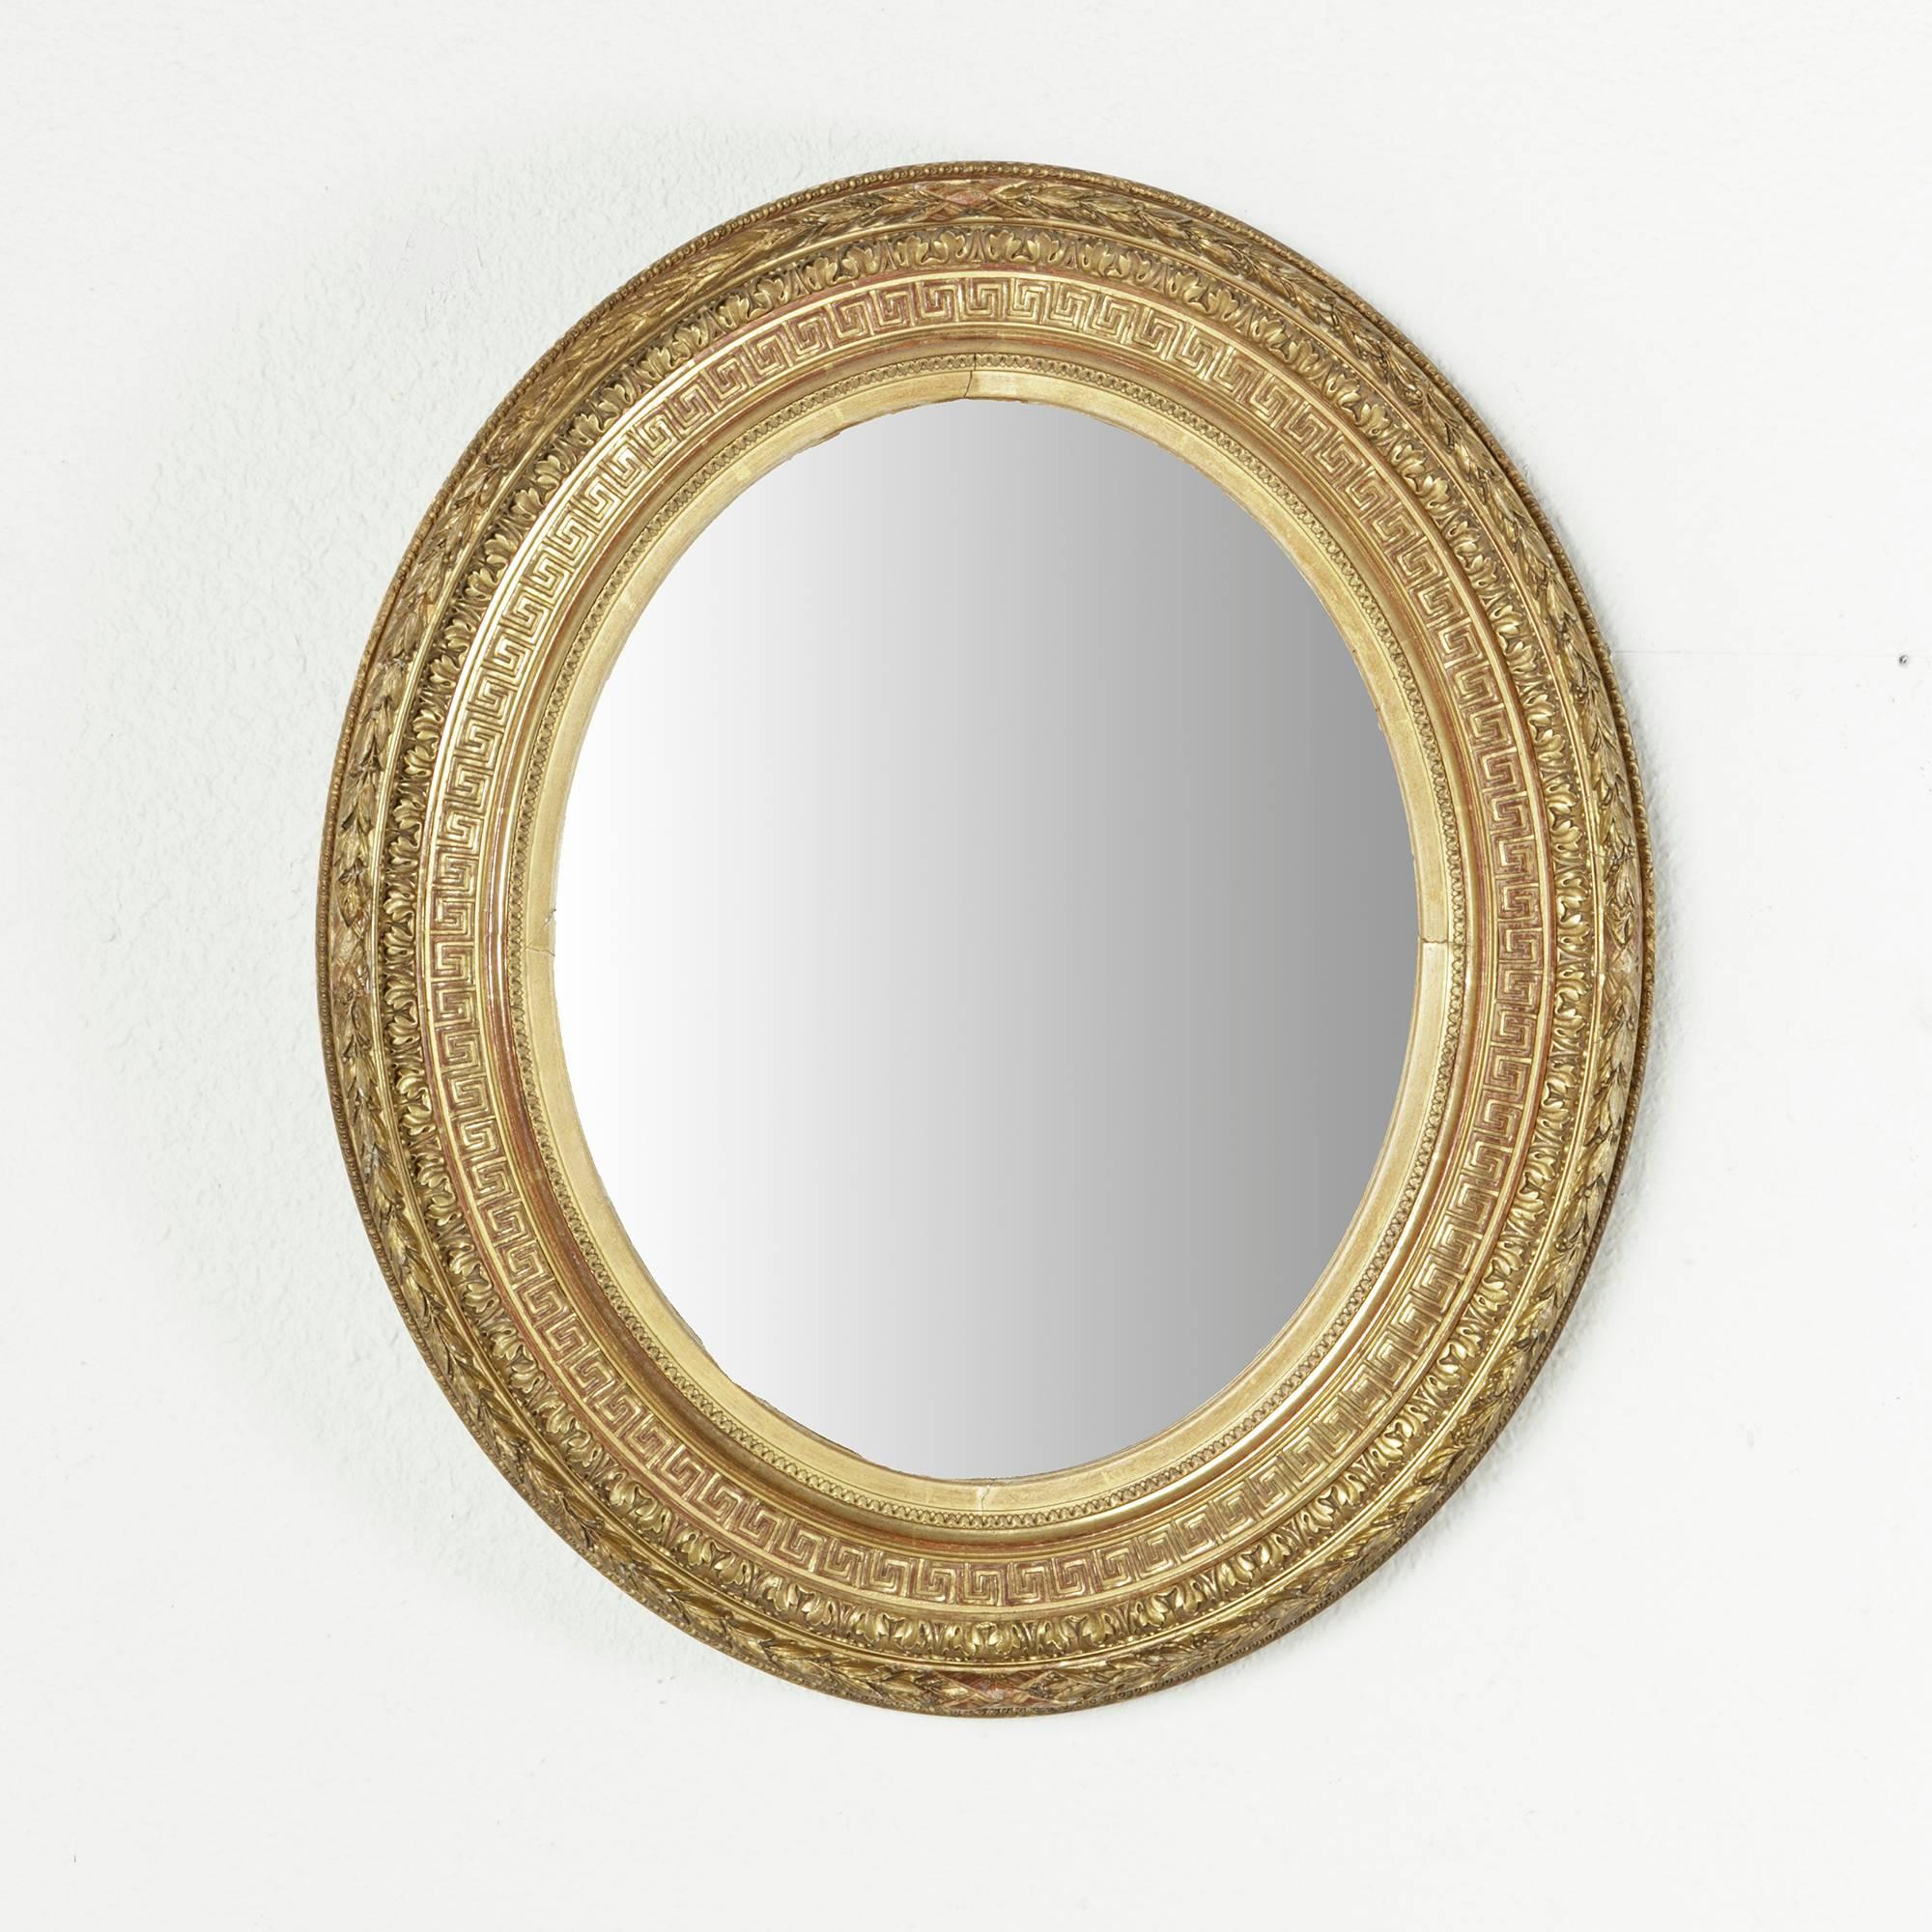 This exquisite small-scale Napoleon III period gilt oval mirror features multiple bands of Louis XVI detailing including acanthus leaf and Greek key motifs. Of a rare small-scale, this mirror would be ideal for a powder bath or small entryway. c.